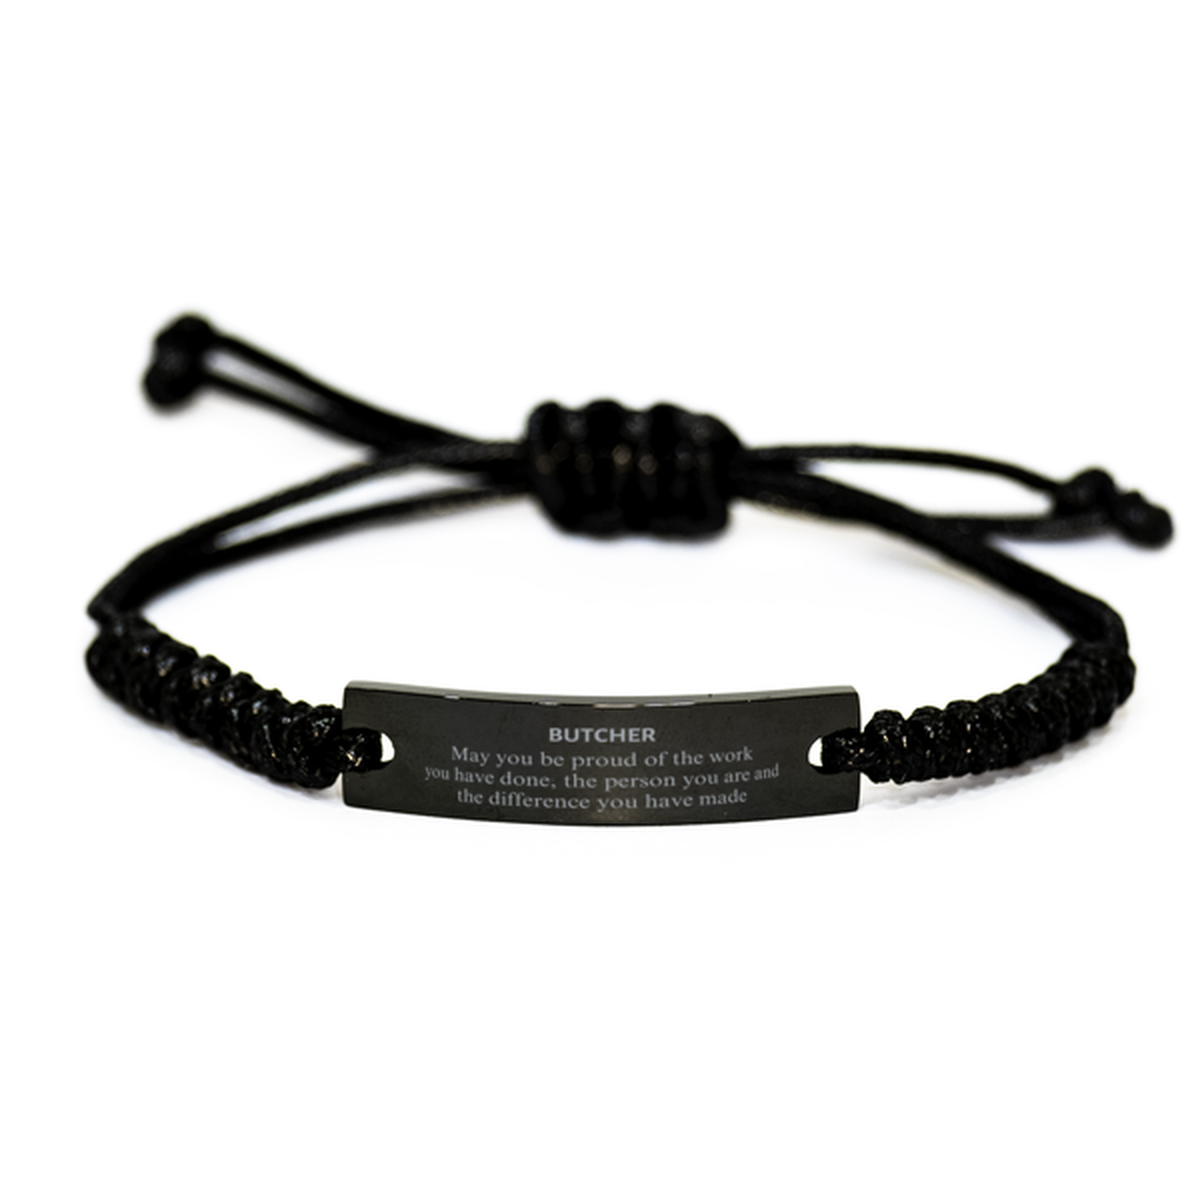 Butcher May you be proud of the work you have done, Retirement Butcher Black Rope Bracelet for Colleague Appreciation Gifts Amazing for Butcher